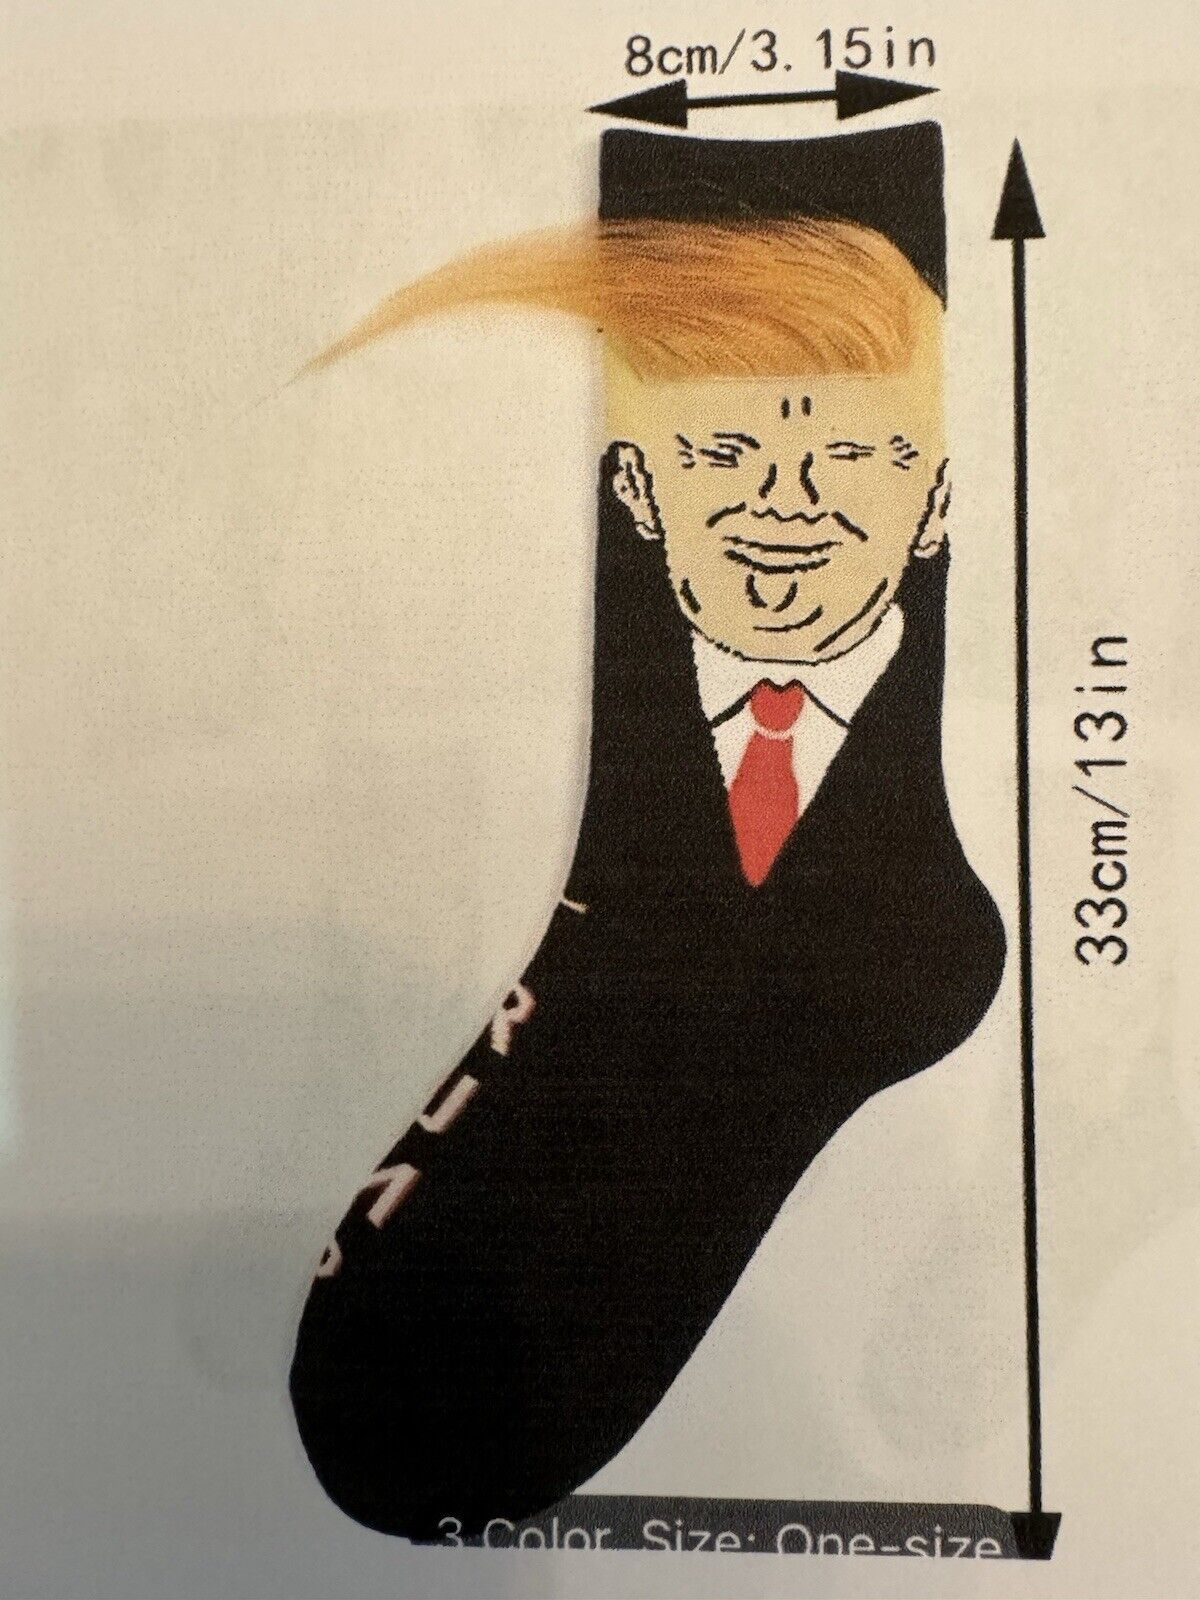 PRESIDENT (45th) DONALD J. TRUMP SOCKS. SHOW YOUR SUPPORT. Request black or blue